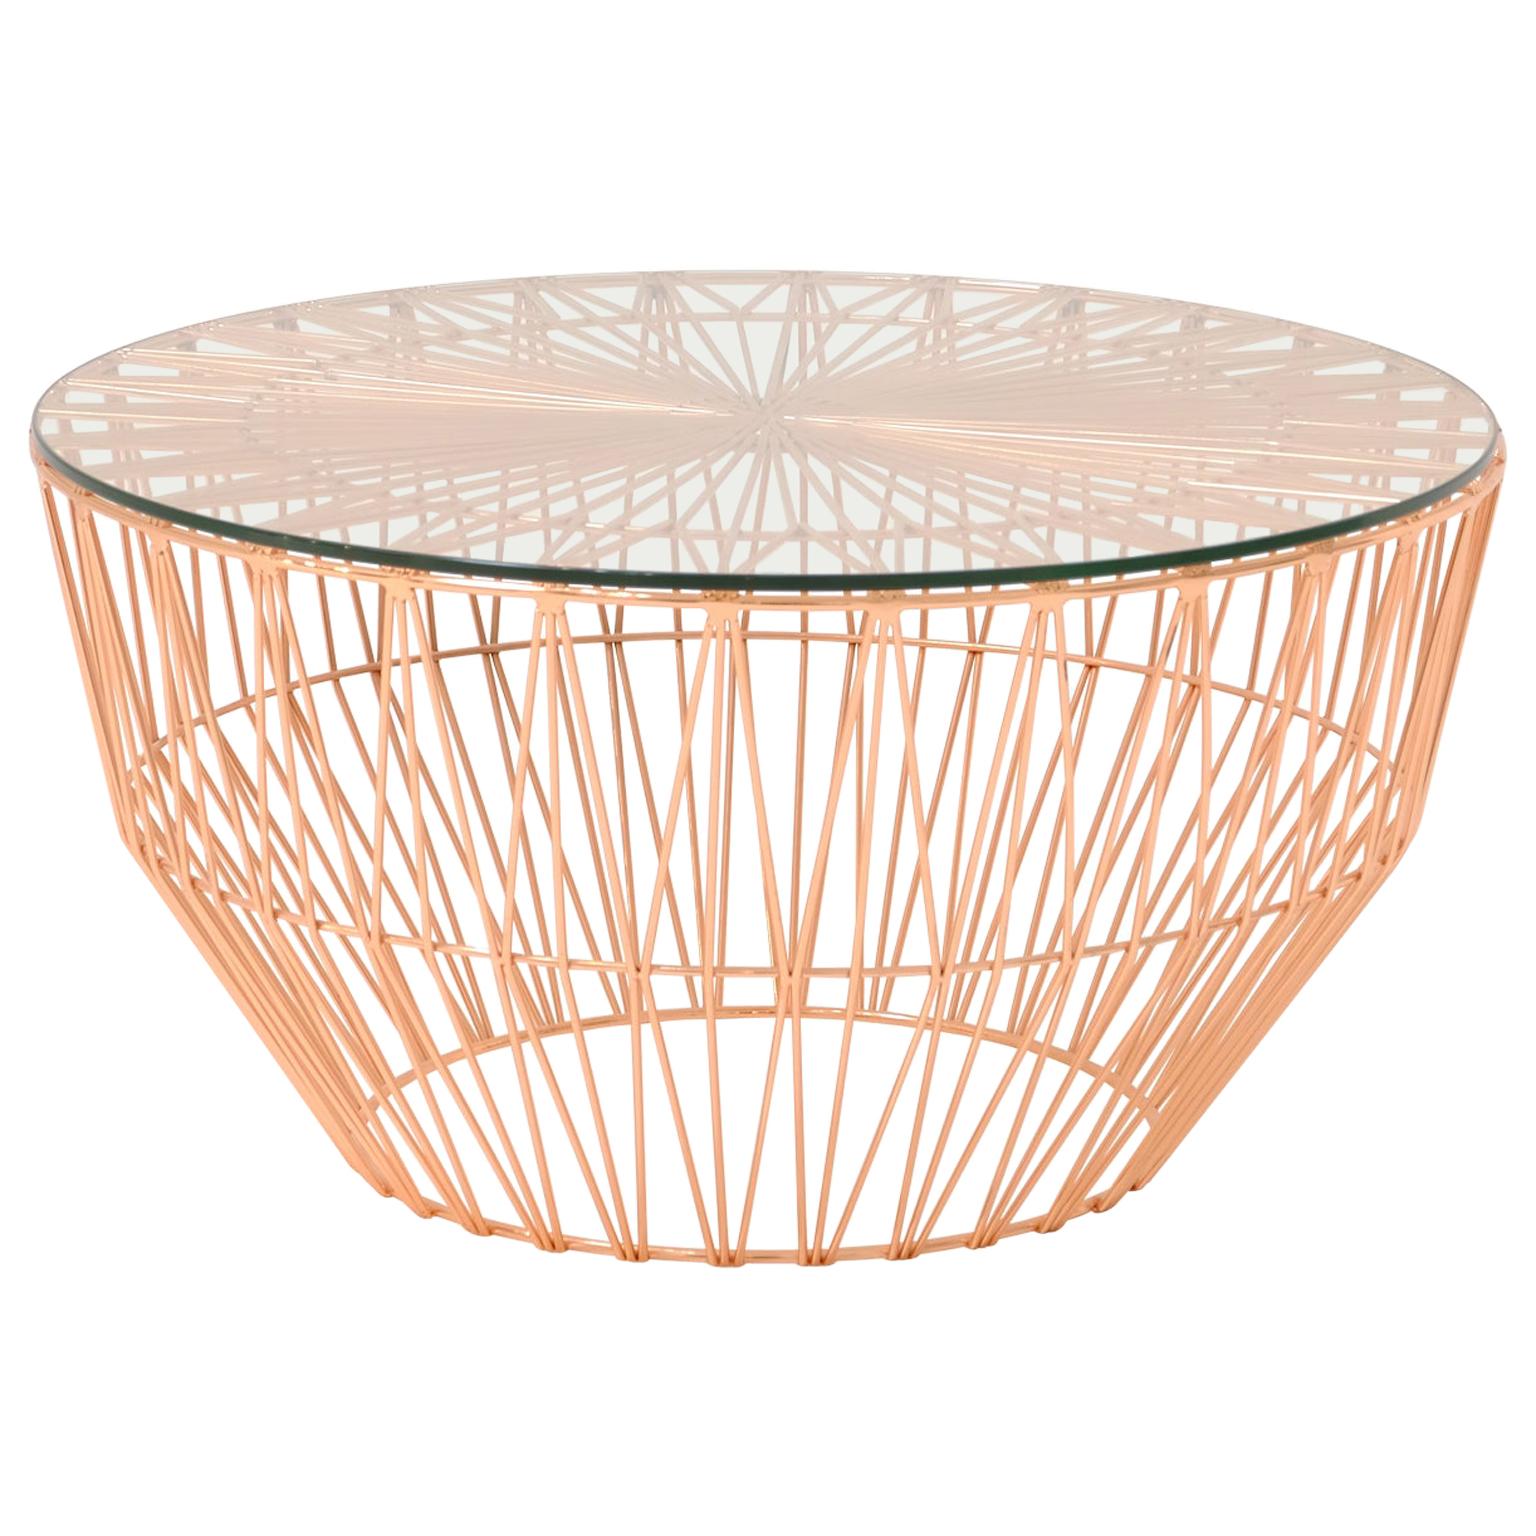 Outdoor Table Ottoman, The Drum Table by Bend Goods, Copper with Glass